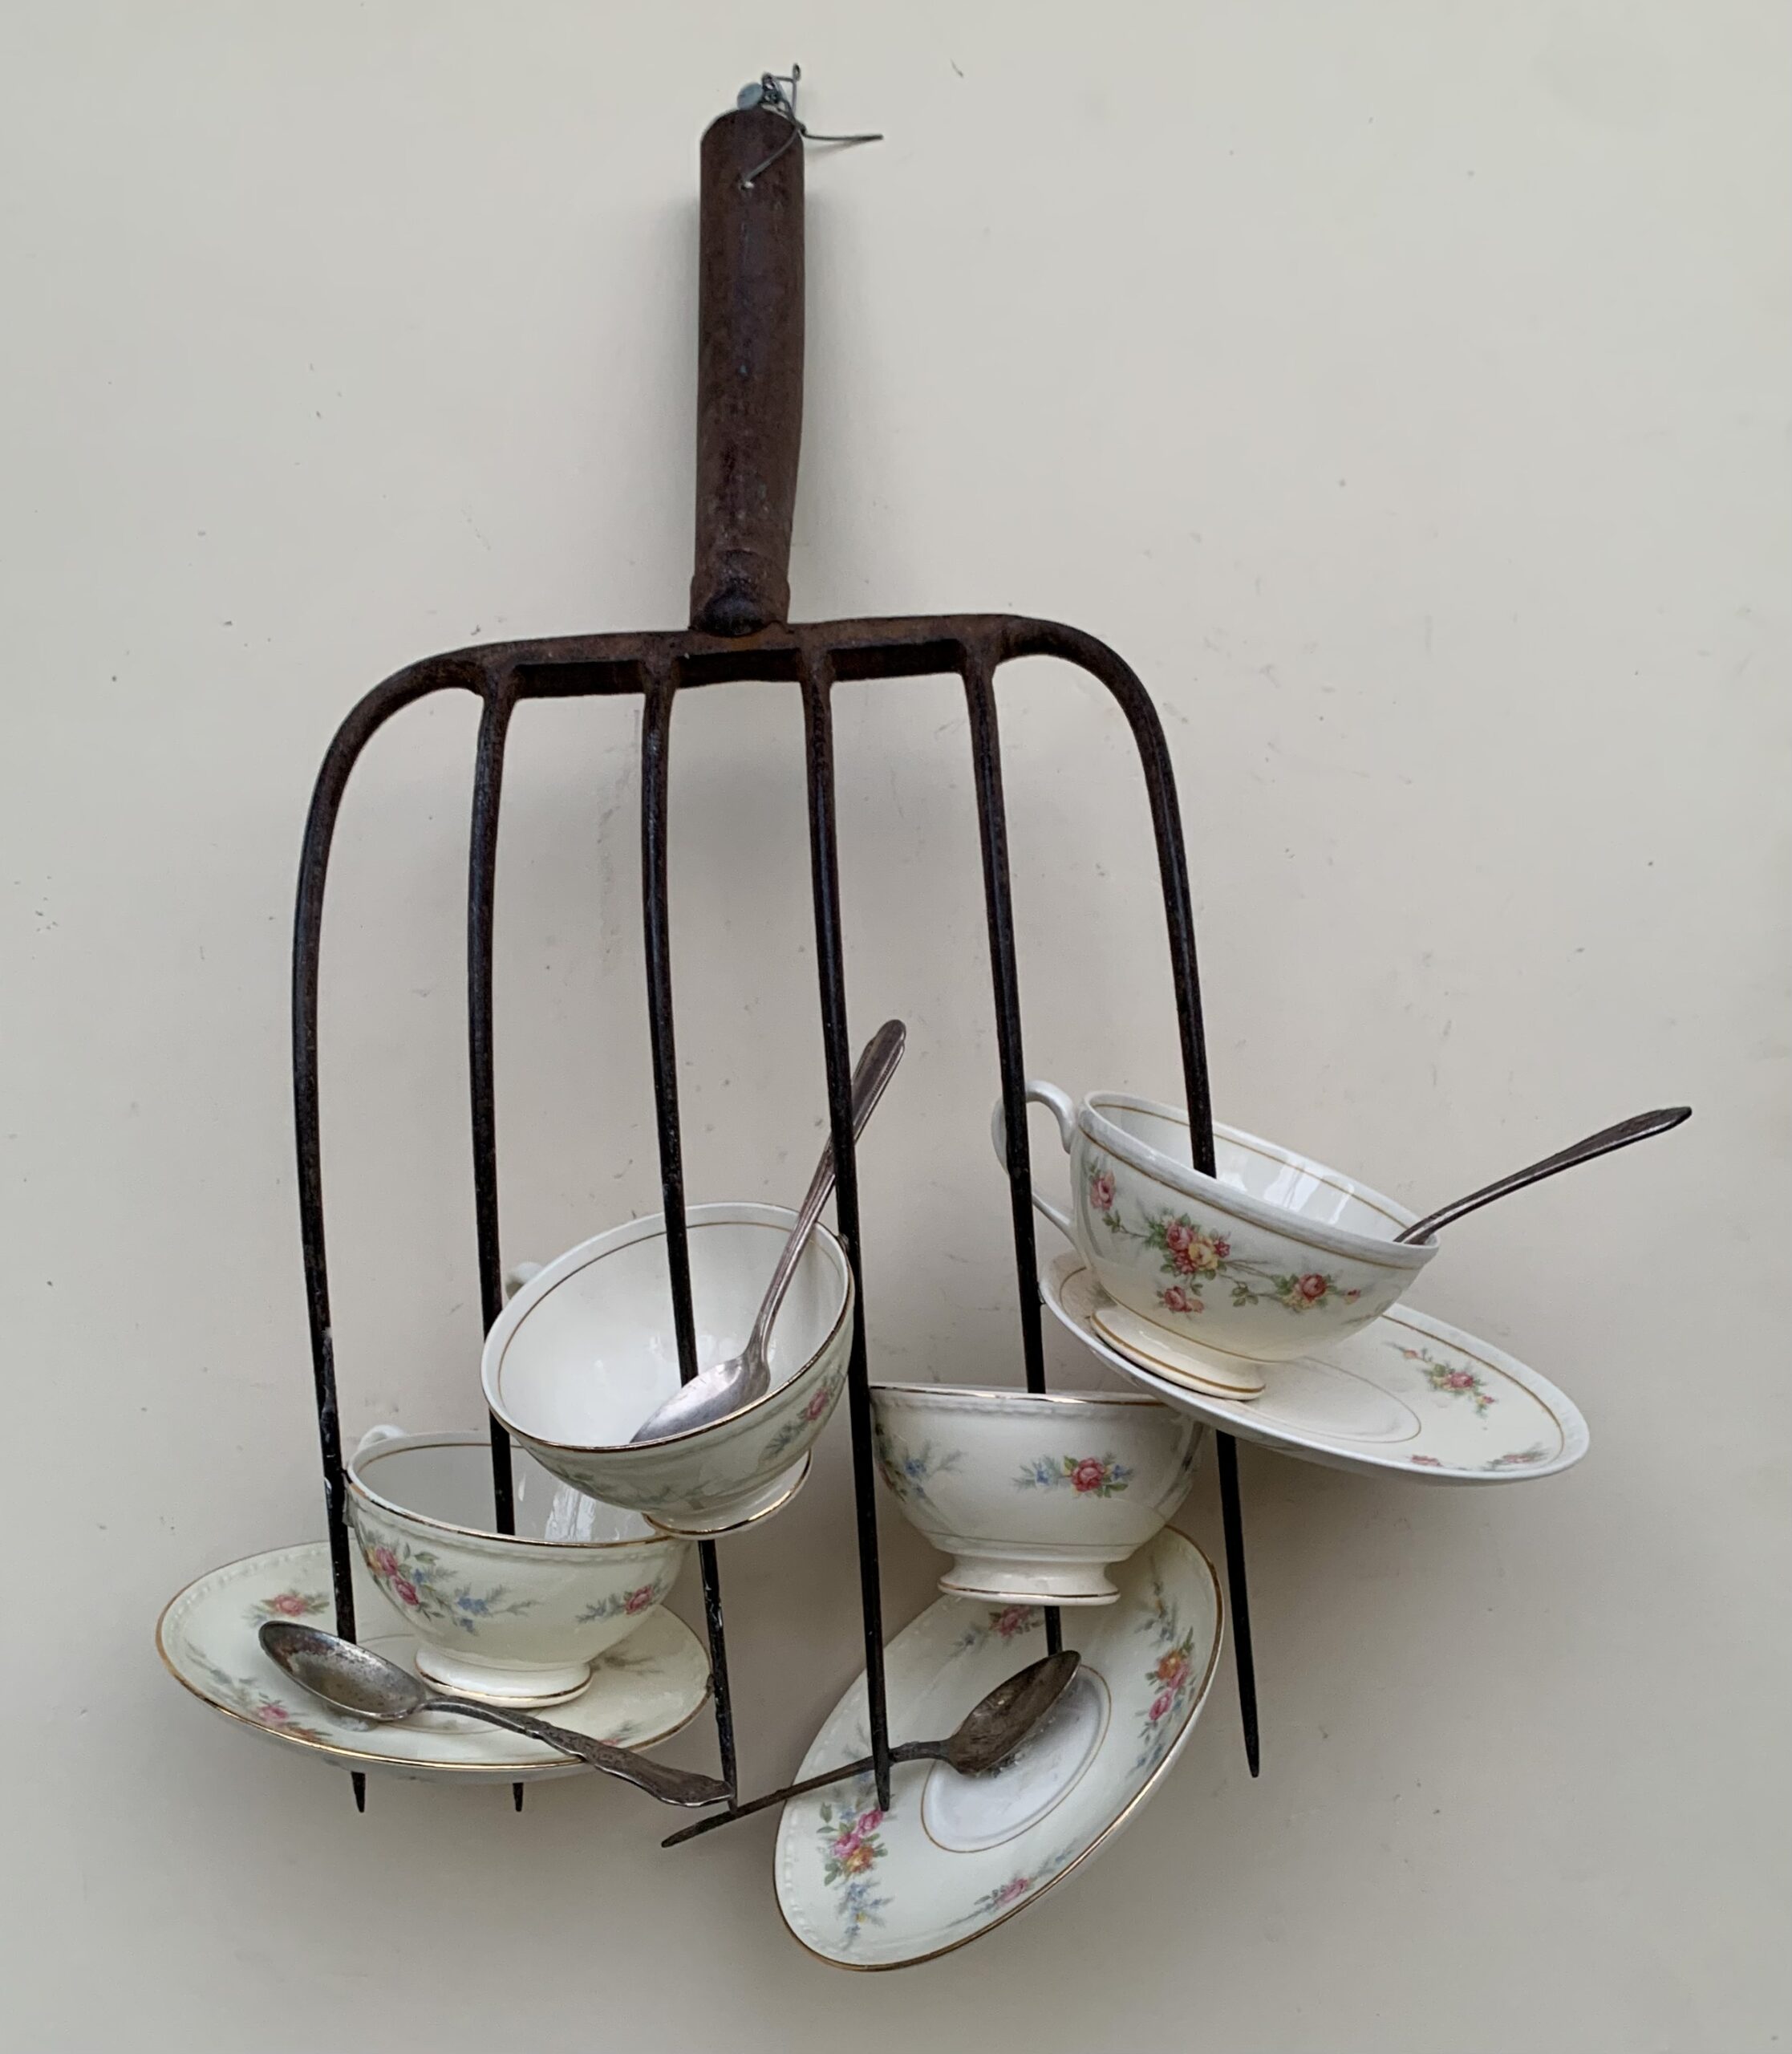 A pitchfork spears a series of teacups and spoons.